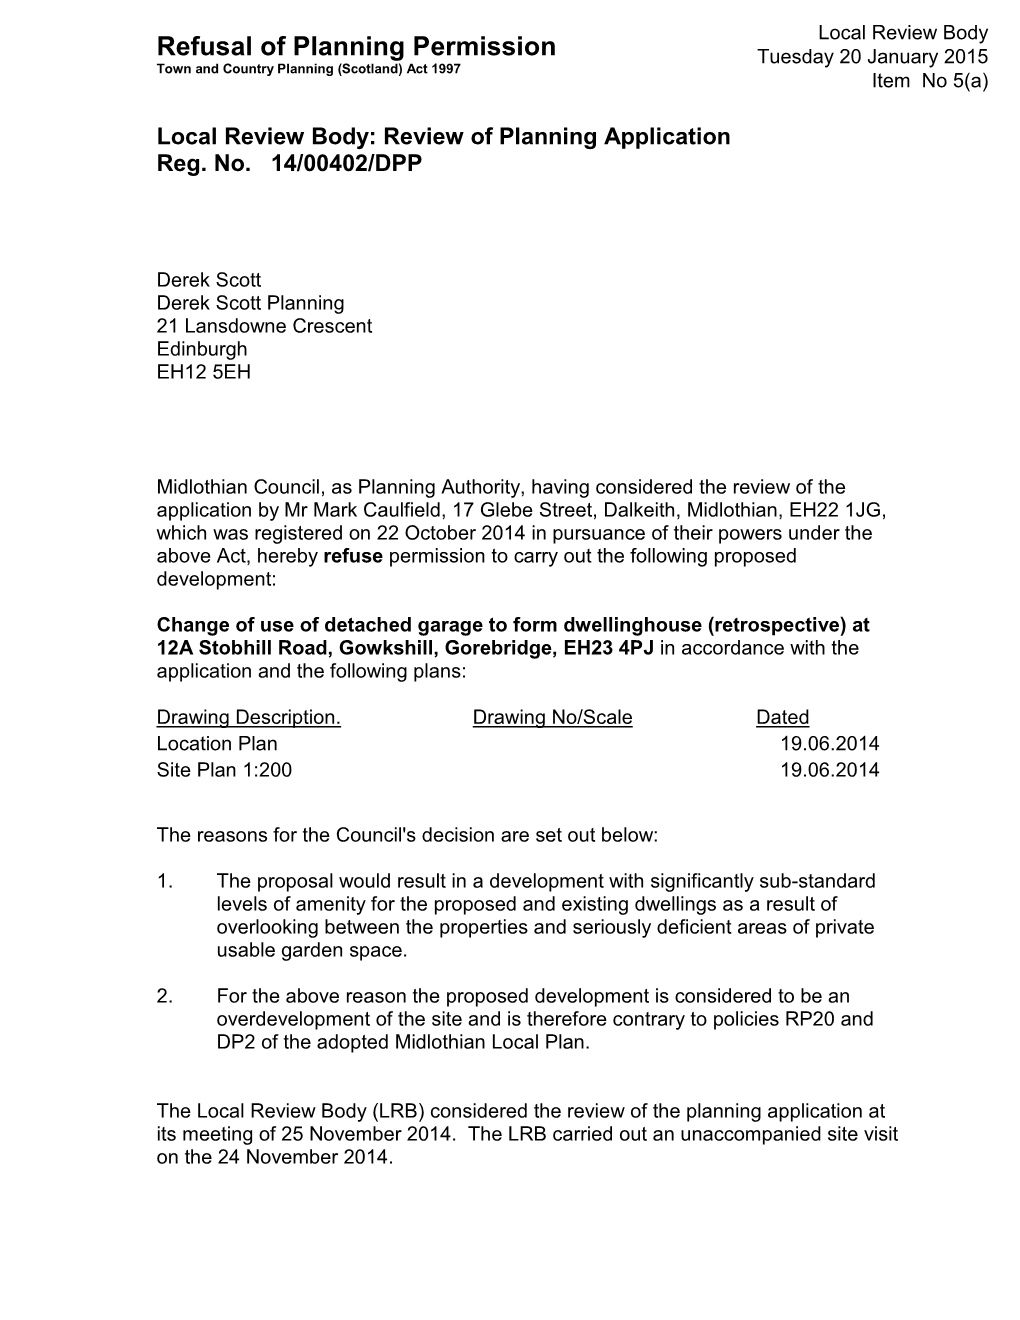 Refusal of Planning Permission Tuesday 20 January 2015 Town and Country Planning (Scotland) Act 1997 Item No 5(A)